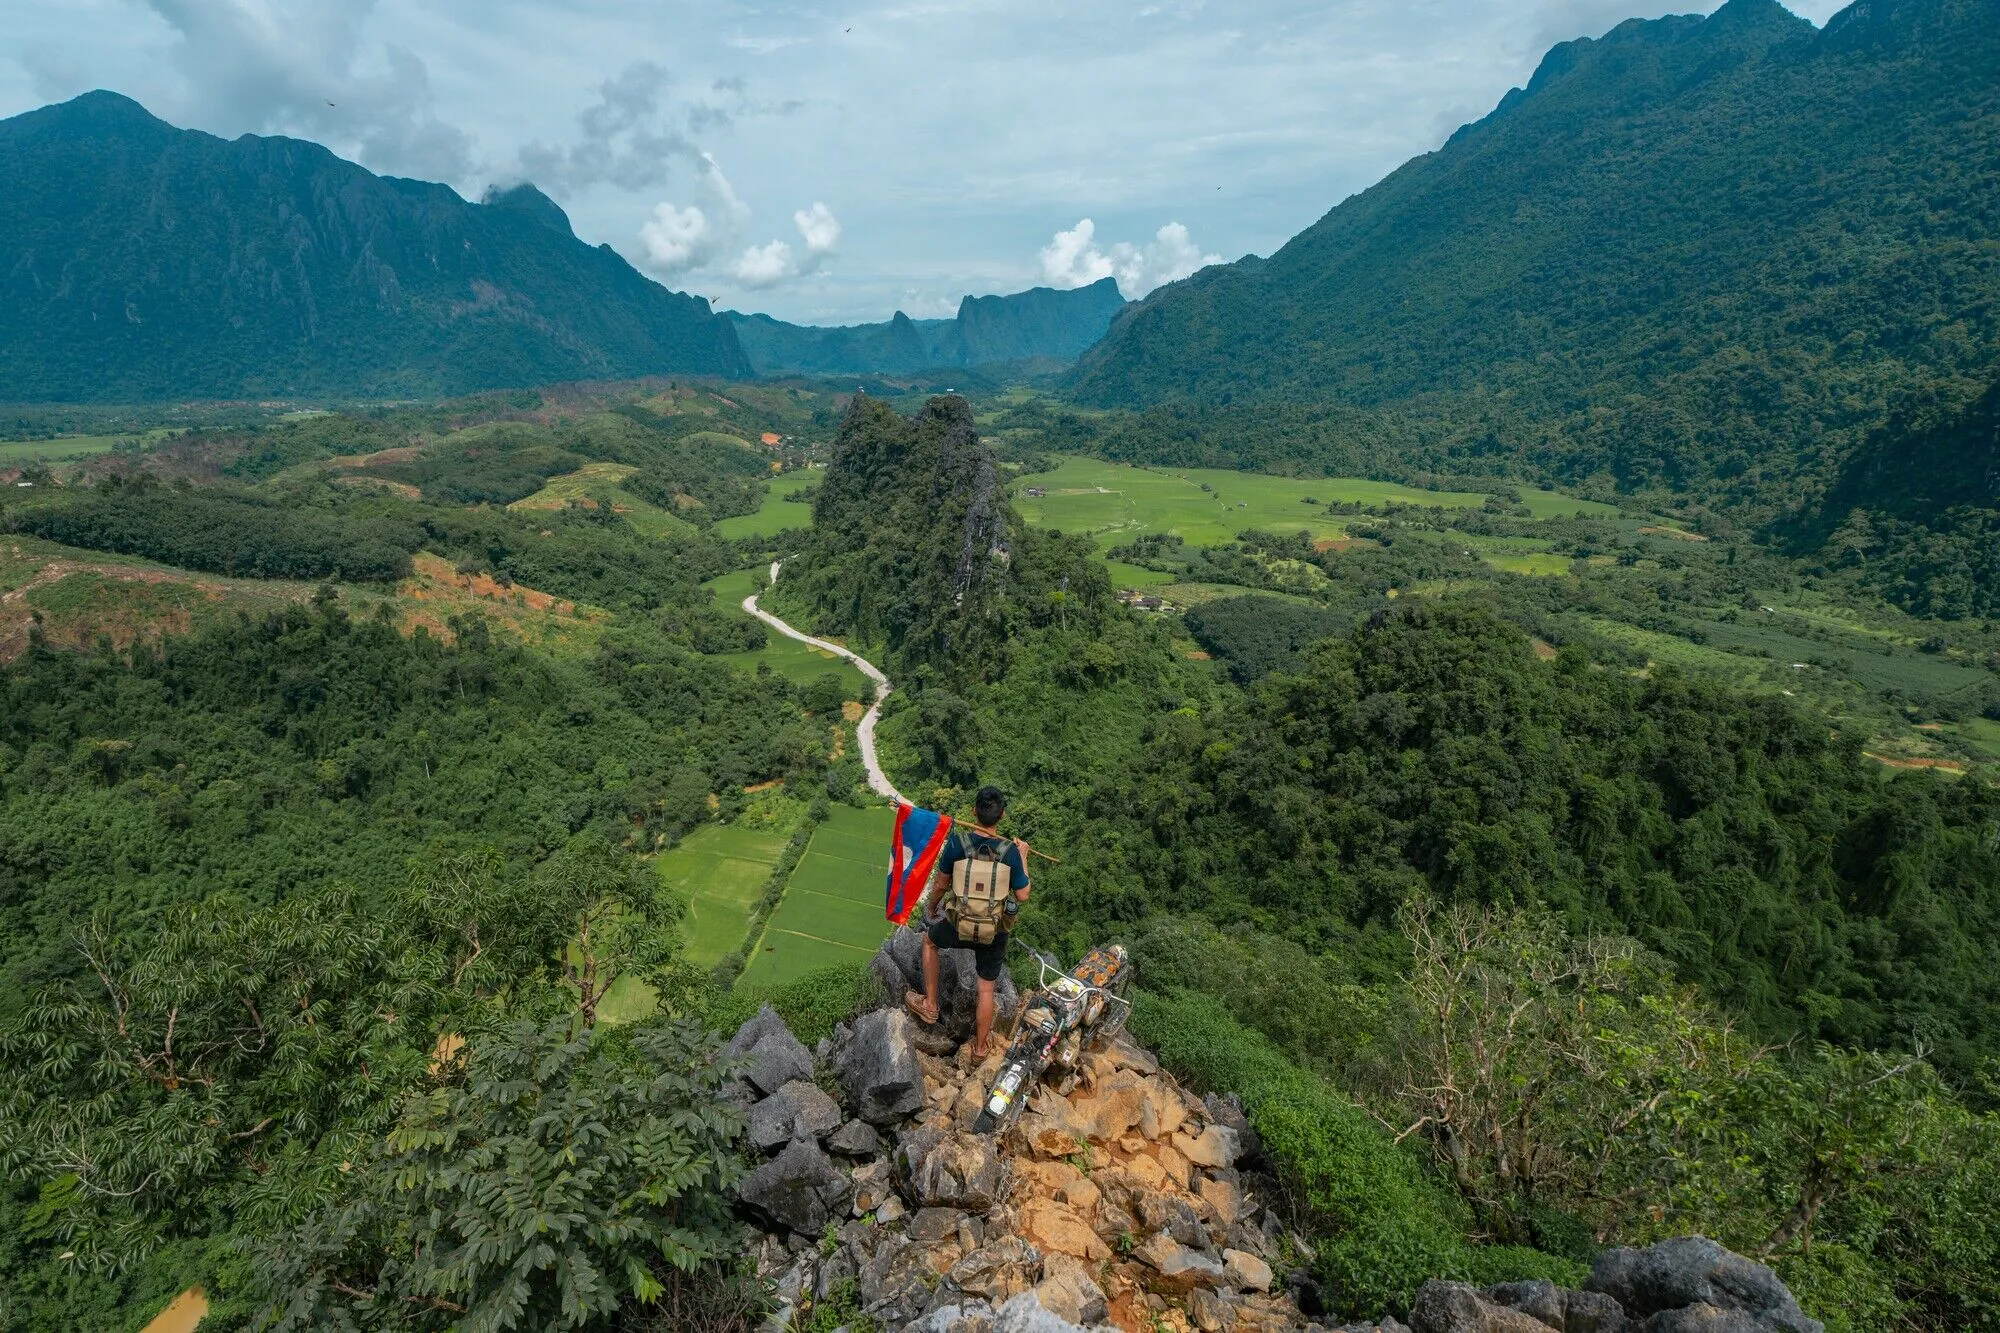 10 Awesome Things to Do in Vang Vieng for First-Timers - A Complete Travel Guide